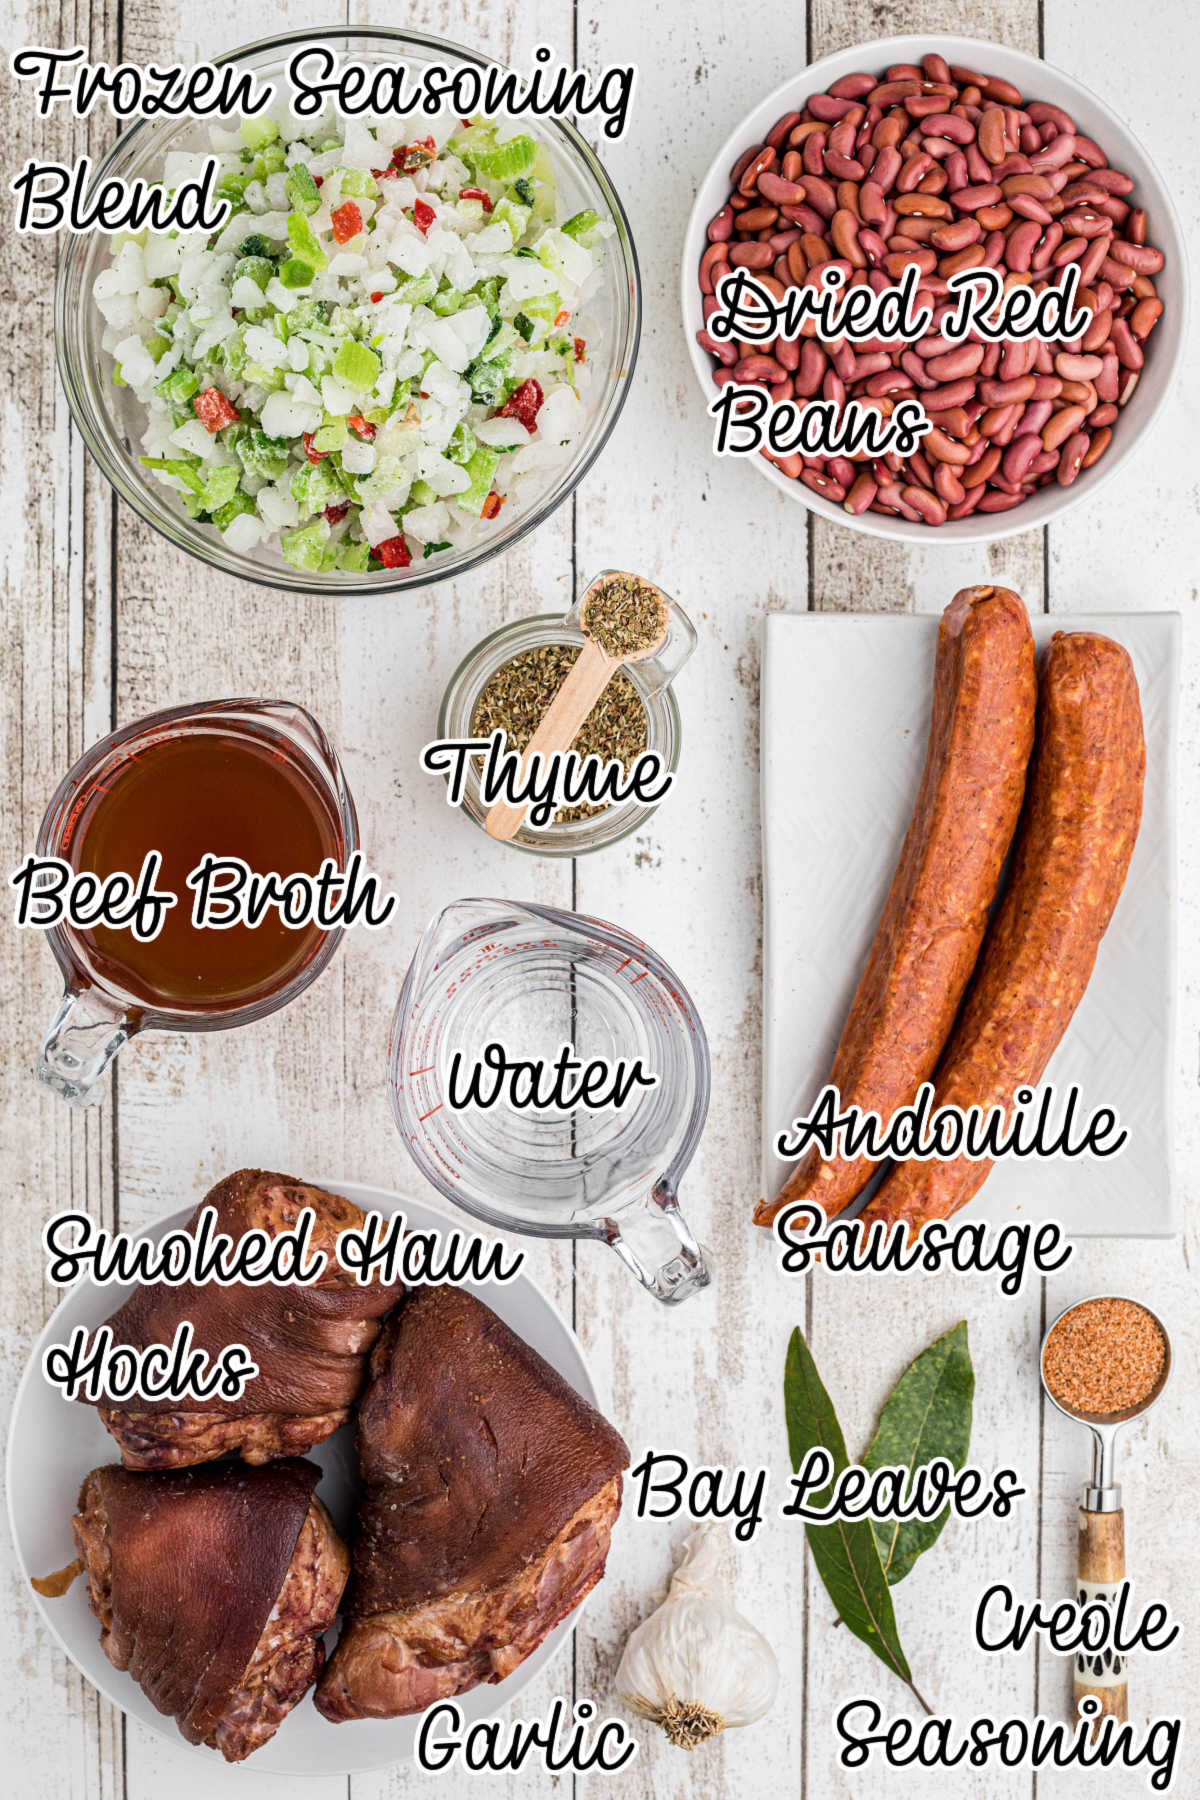 Ingredients laid out for what would be needed to make red beans and rice with ham hocks, with text overlay.